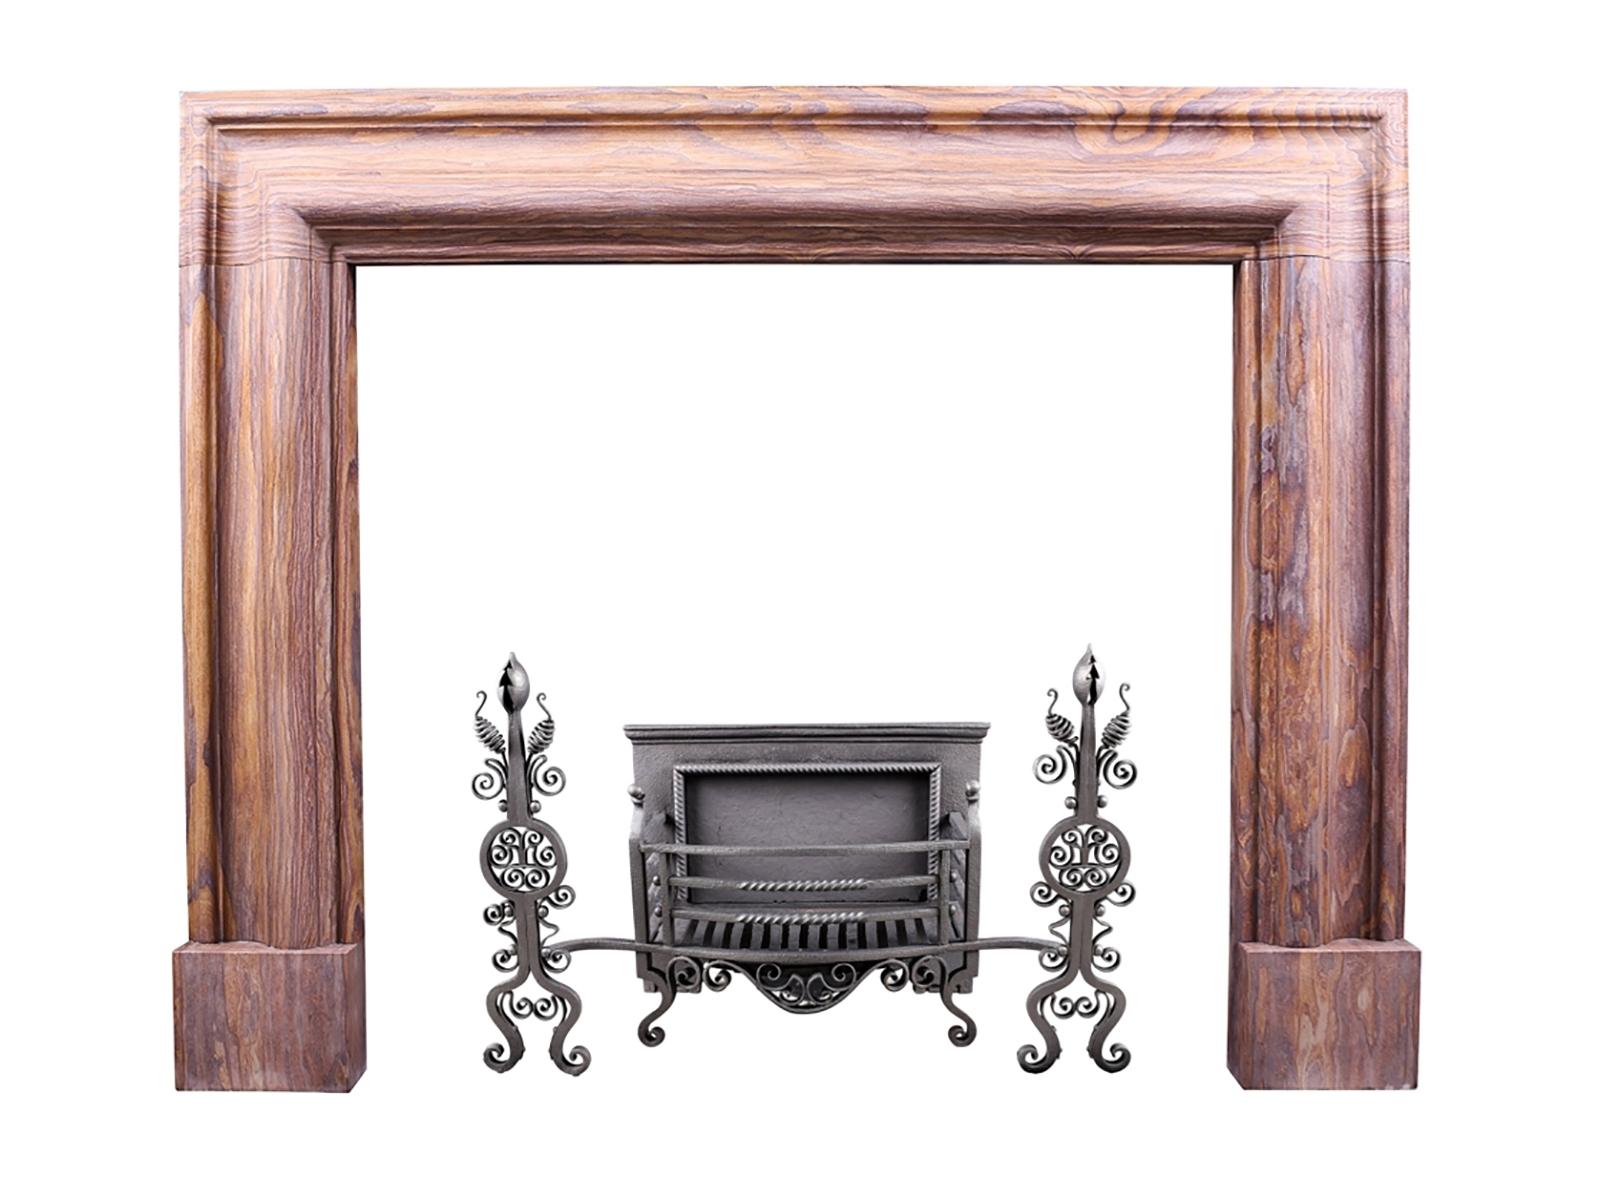 A Baroque Bolection fireplace in Italian wooden fossil stone

Depth: 4 1/4? – 11 cm
External Height: 46 1/2” – 118 cm
External Width: 59? – 149.8 cm
Internal Height: 38? – 96.5 cm
Internal Width: 42? – 106.6 cm.